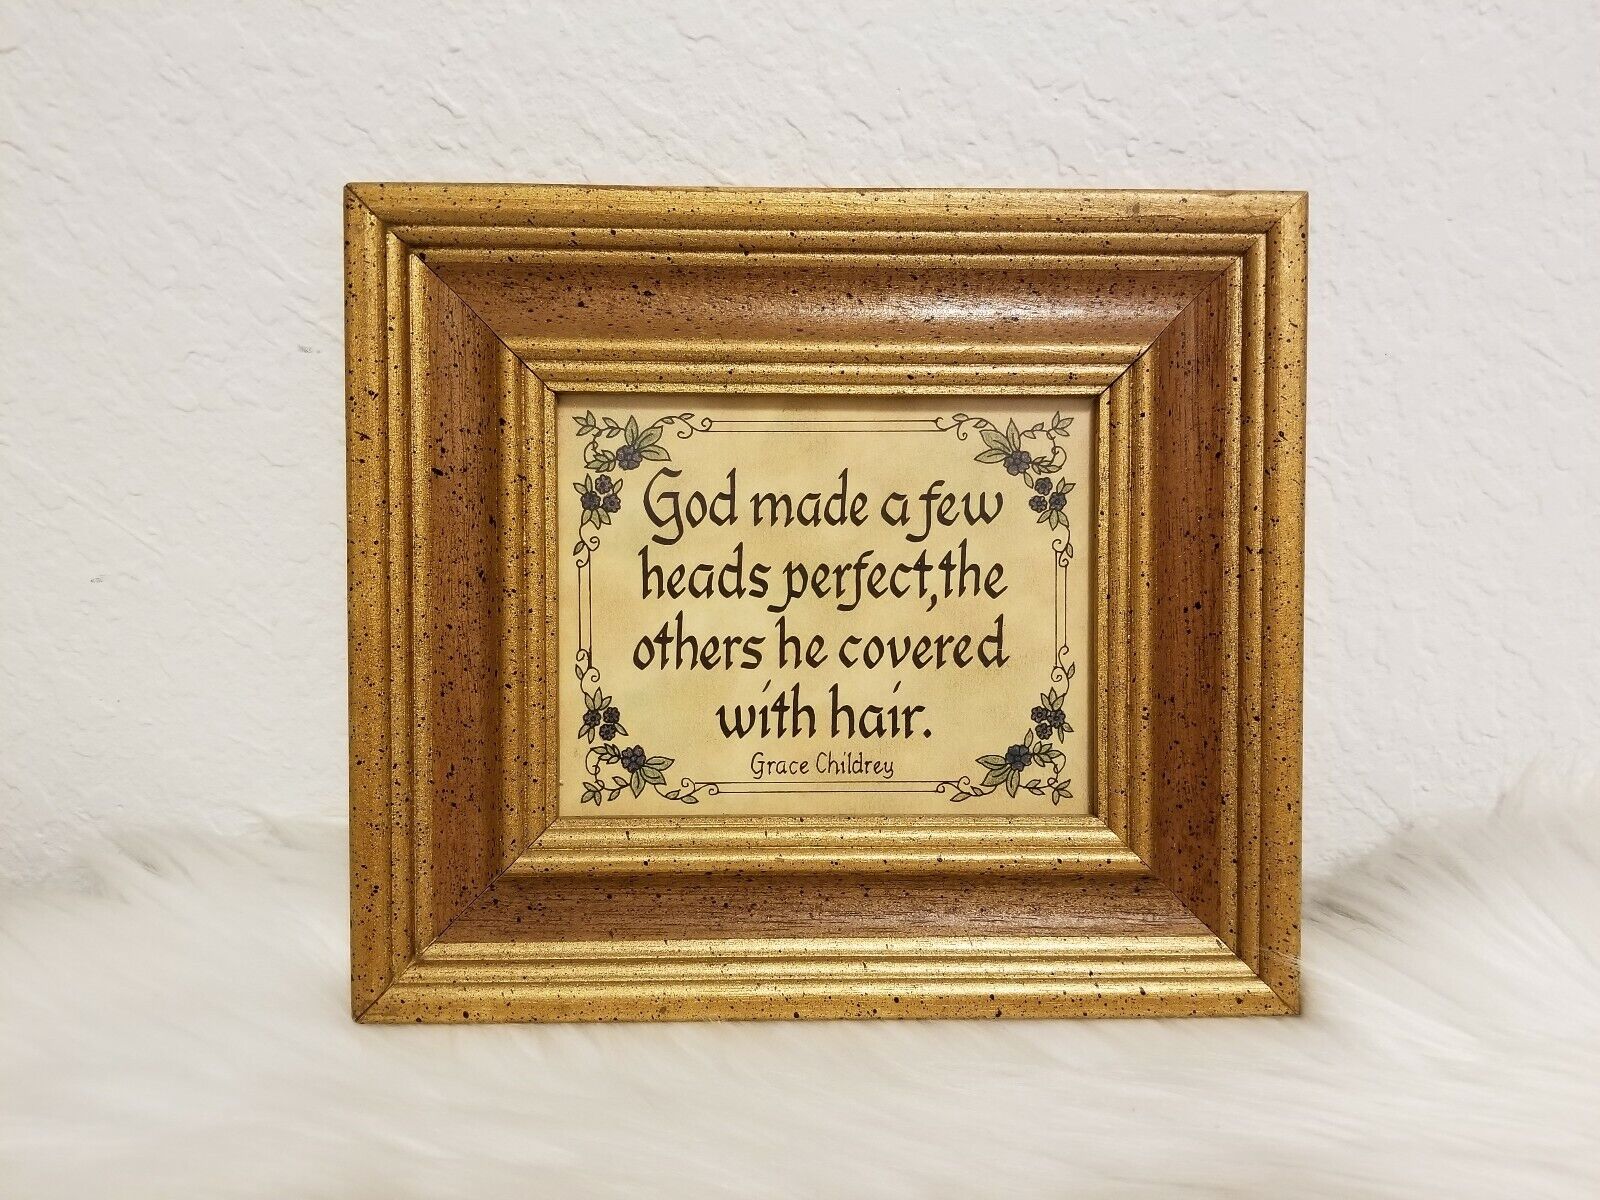 Vintage Gold Wood Framed Christian Religious Humor Quote Wall Art Great Gifts